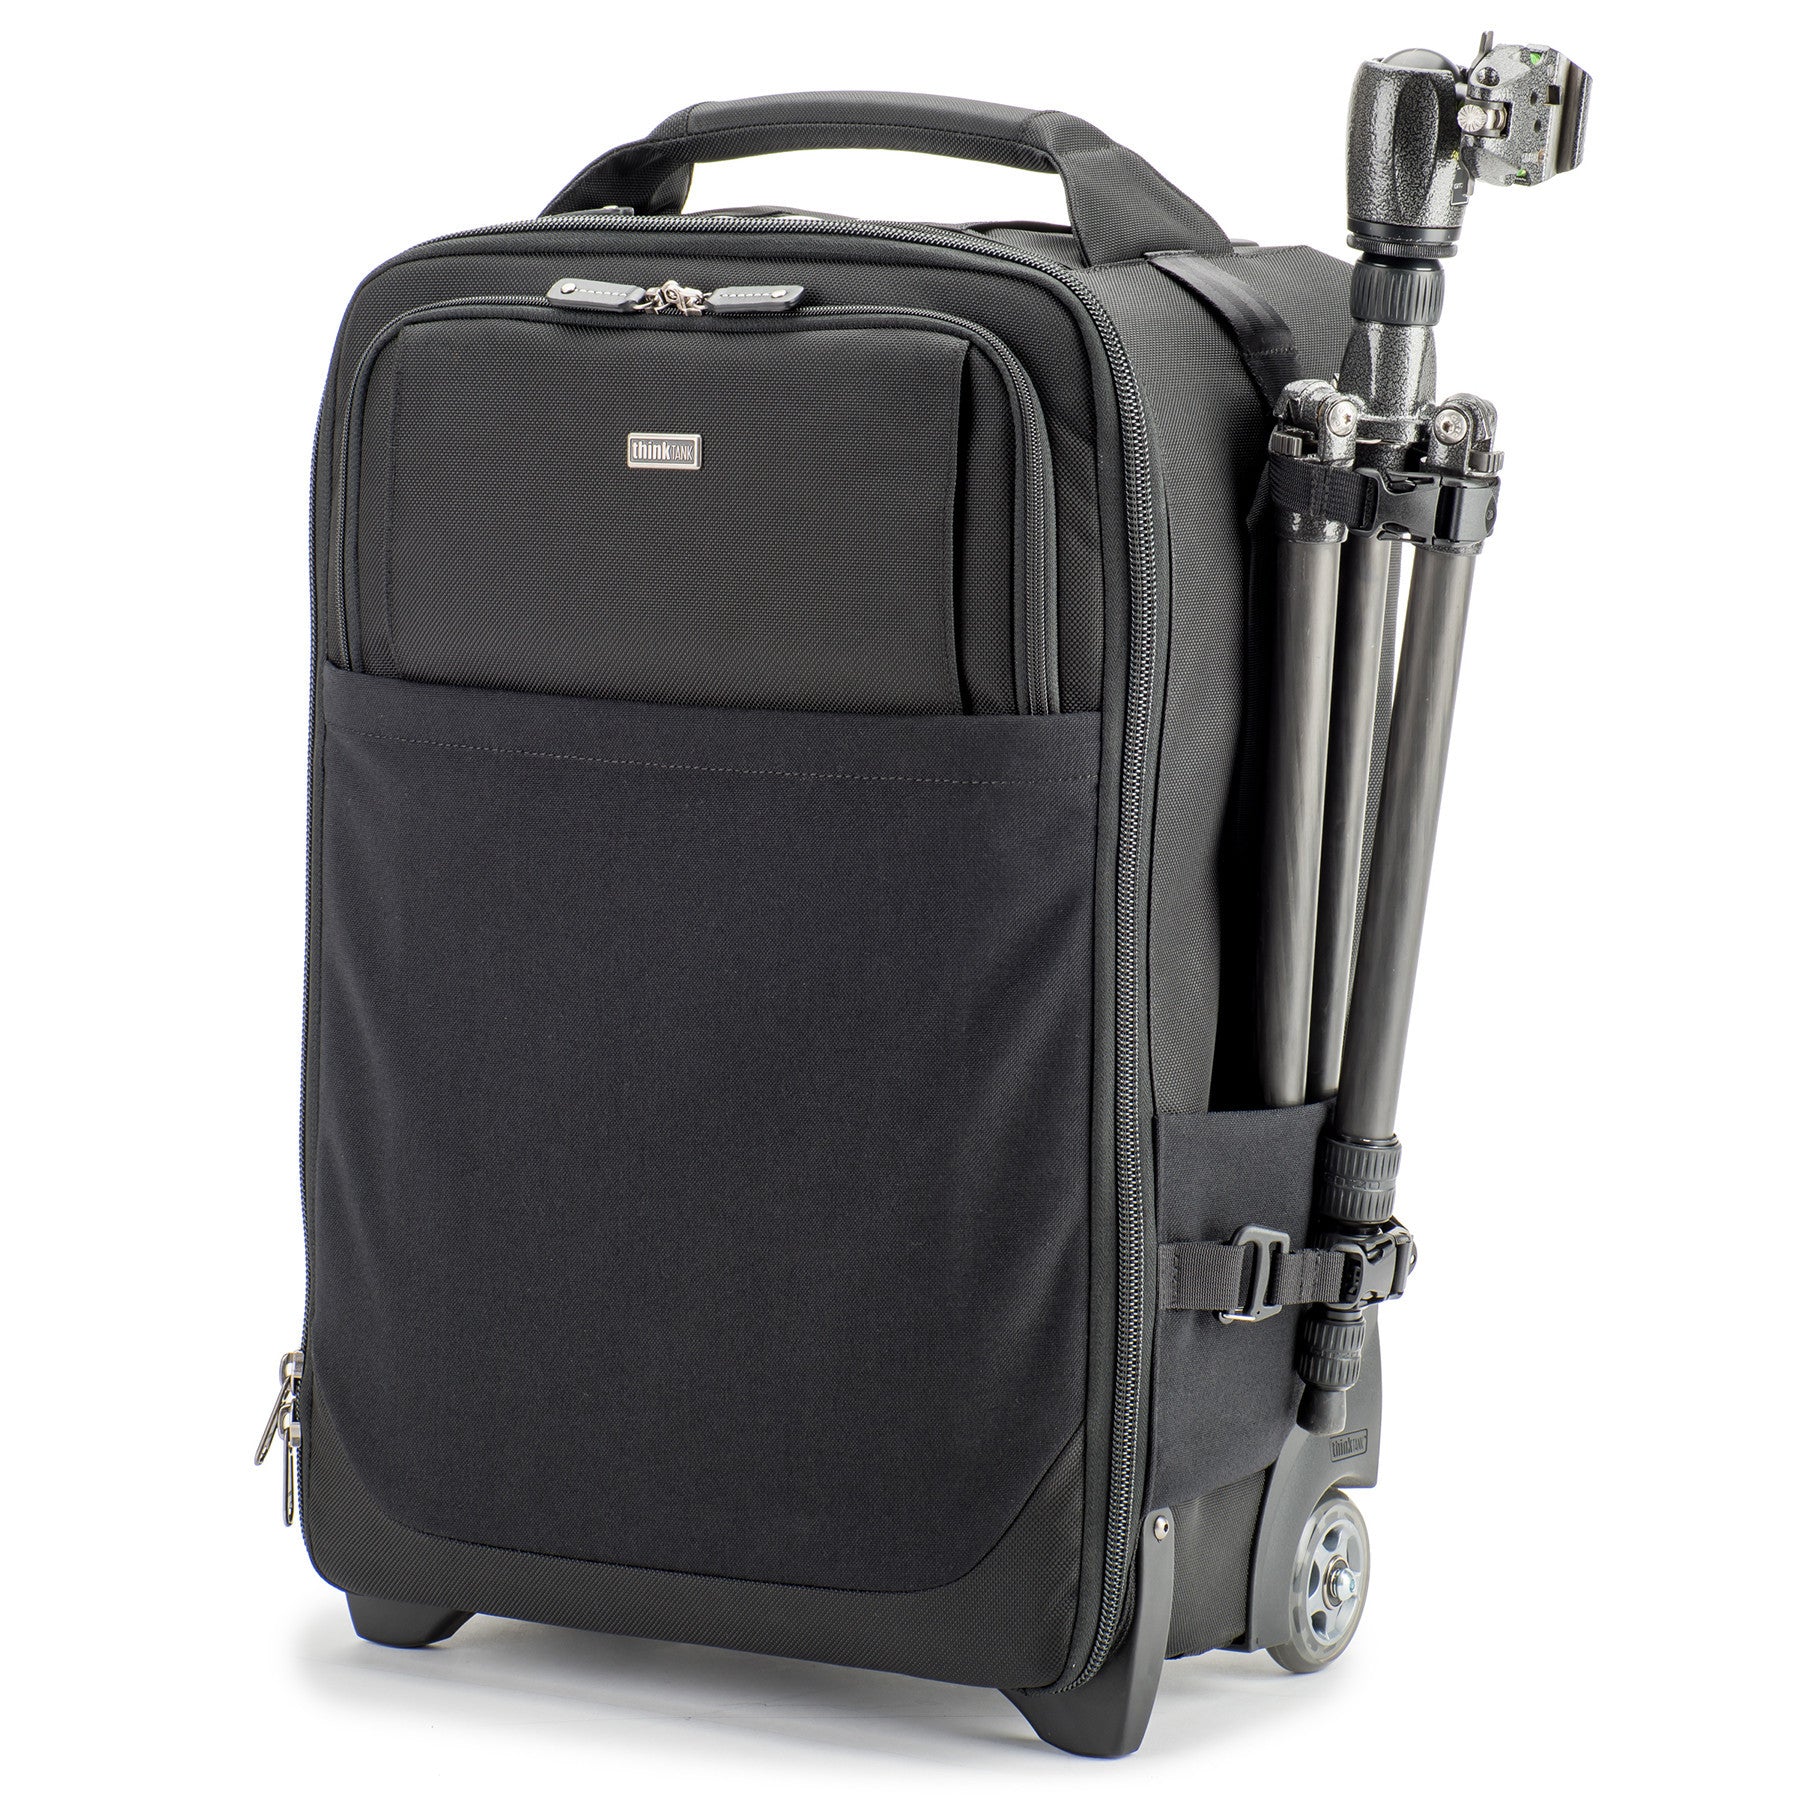 Think Tank Airport International V3.0 Rolling Camera Bag, bags roller bags, Think Tank Photo - Pictureline  - 4